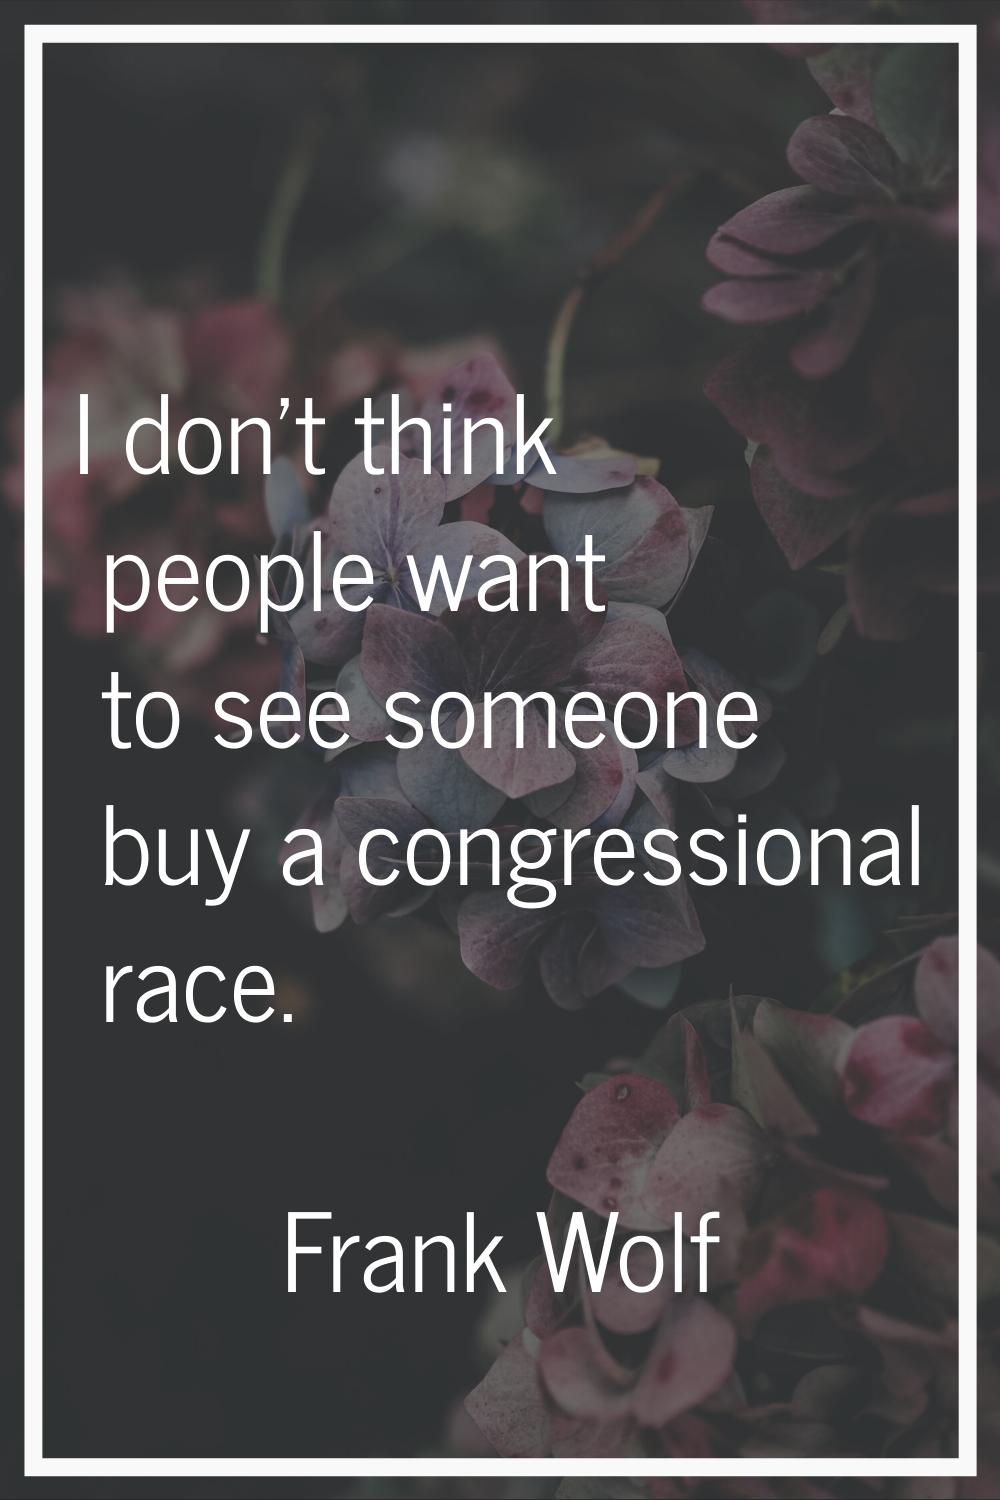 I don't think people want to see someone buy a congressional race.